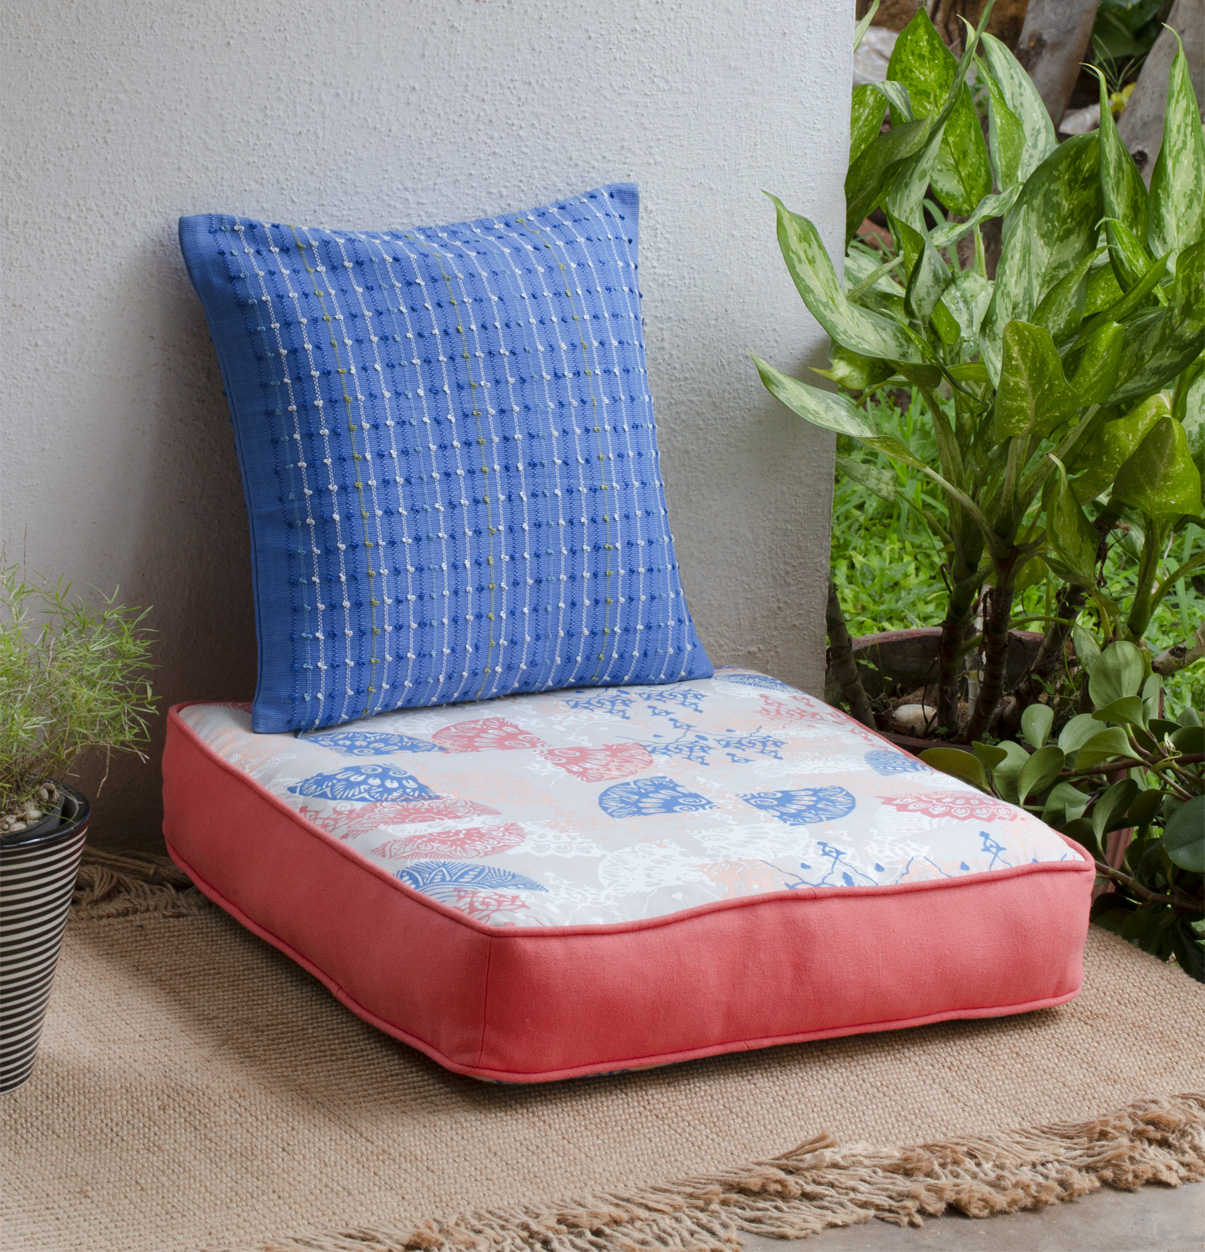 Chambray Scattered Printed Cotton Floor Cushion Blue/Red